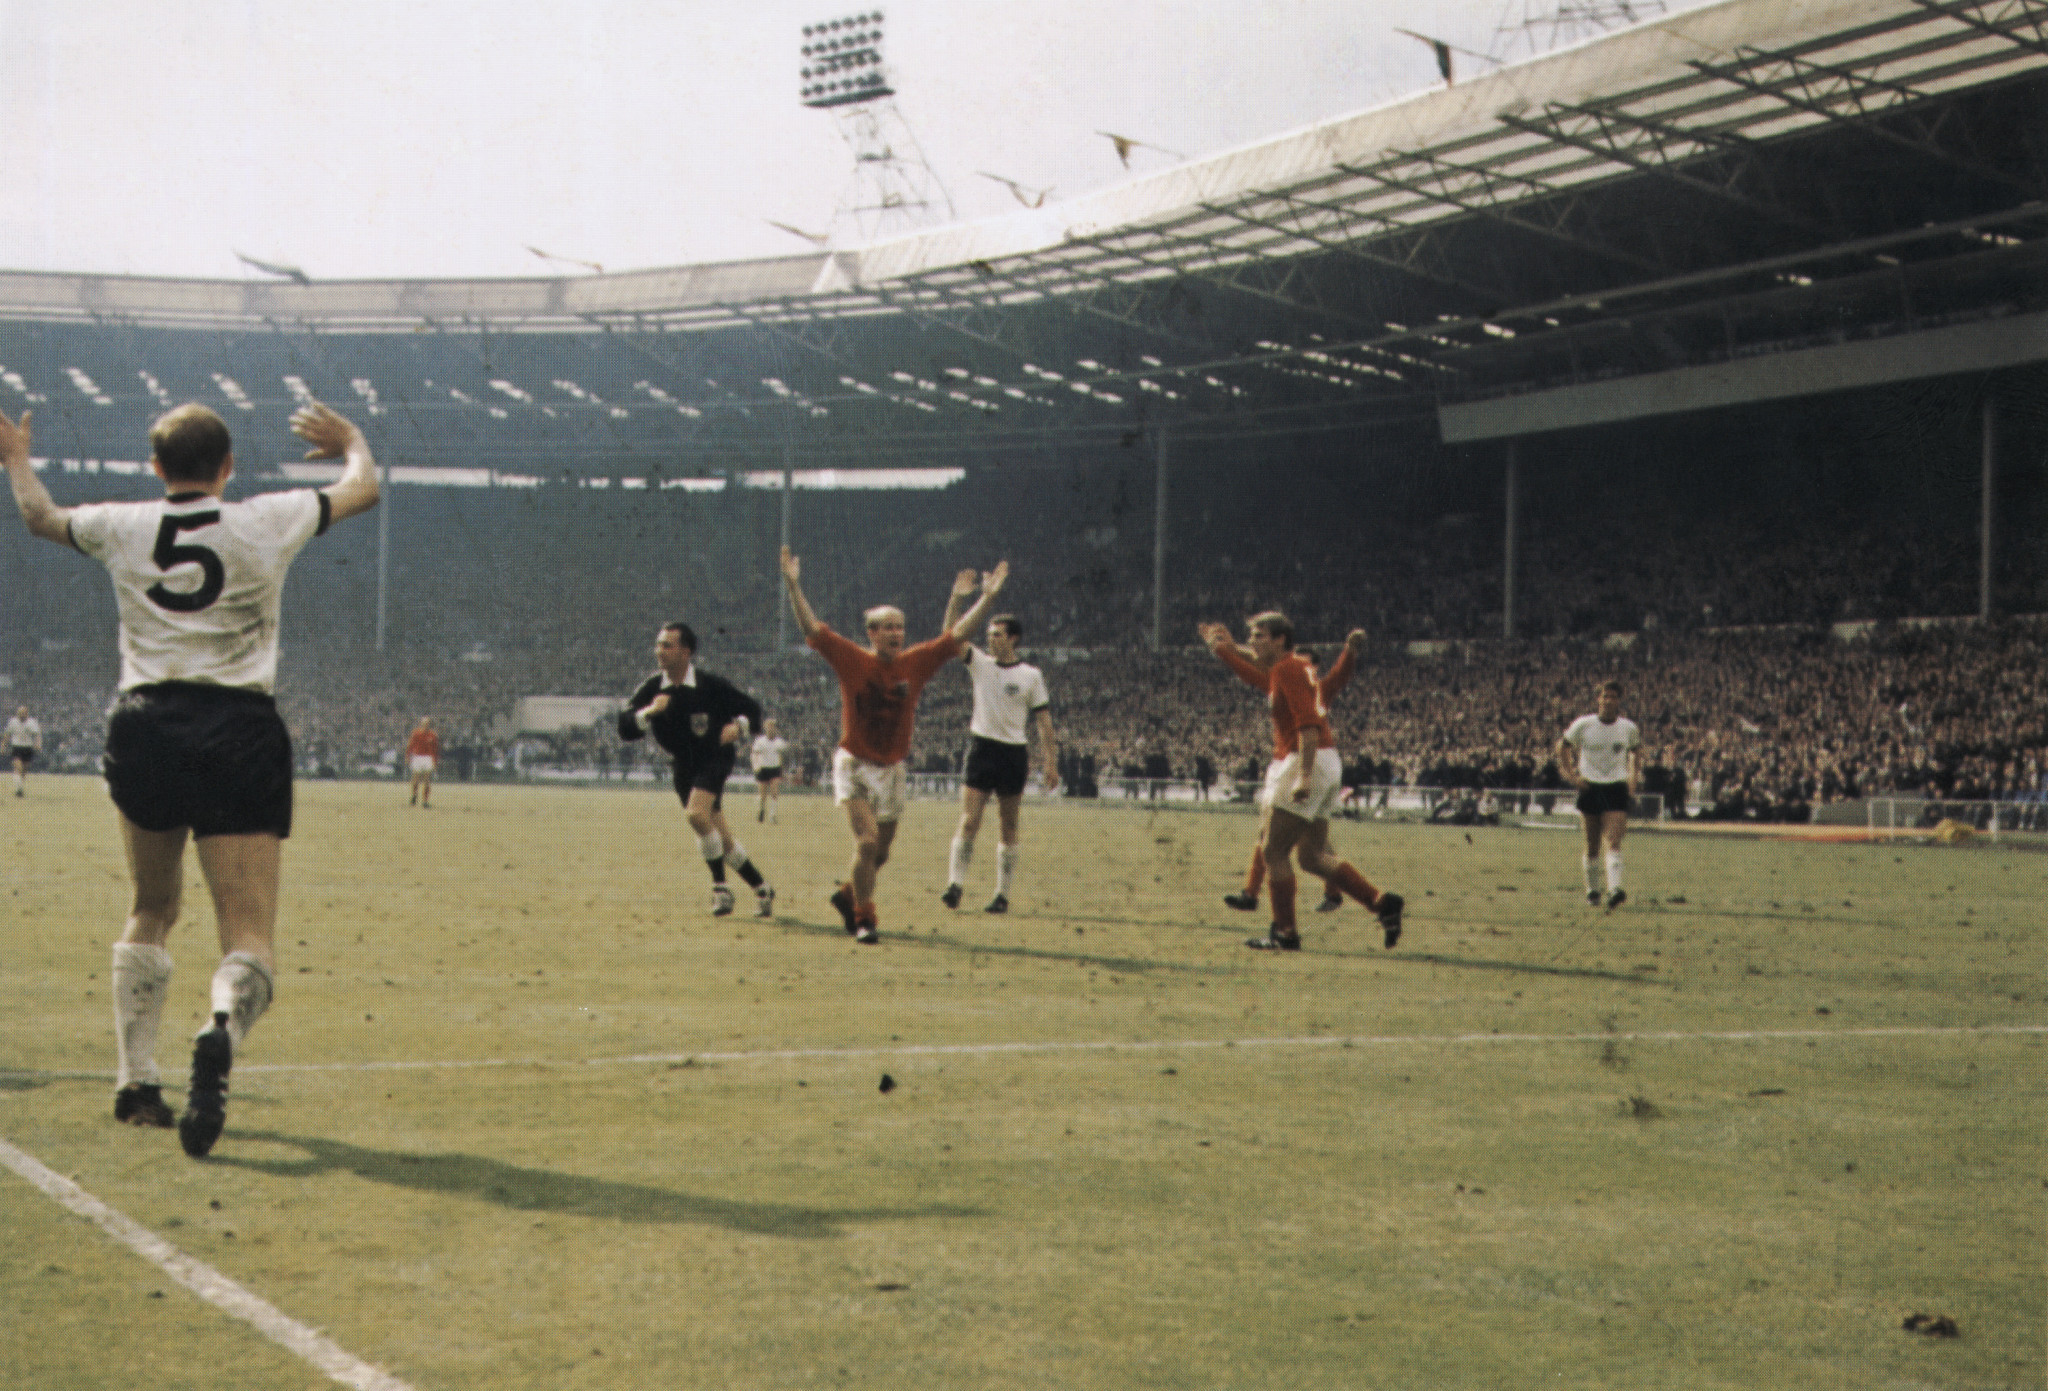 
A goal from England striker Geoff Hurst during the 1966 World Cup was met with protests by West German players ©Getty Images